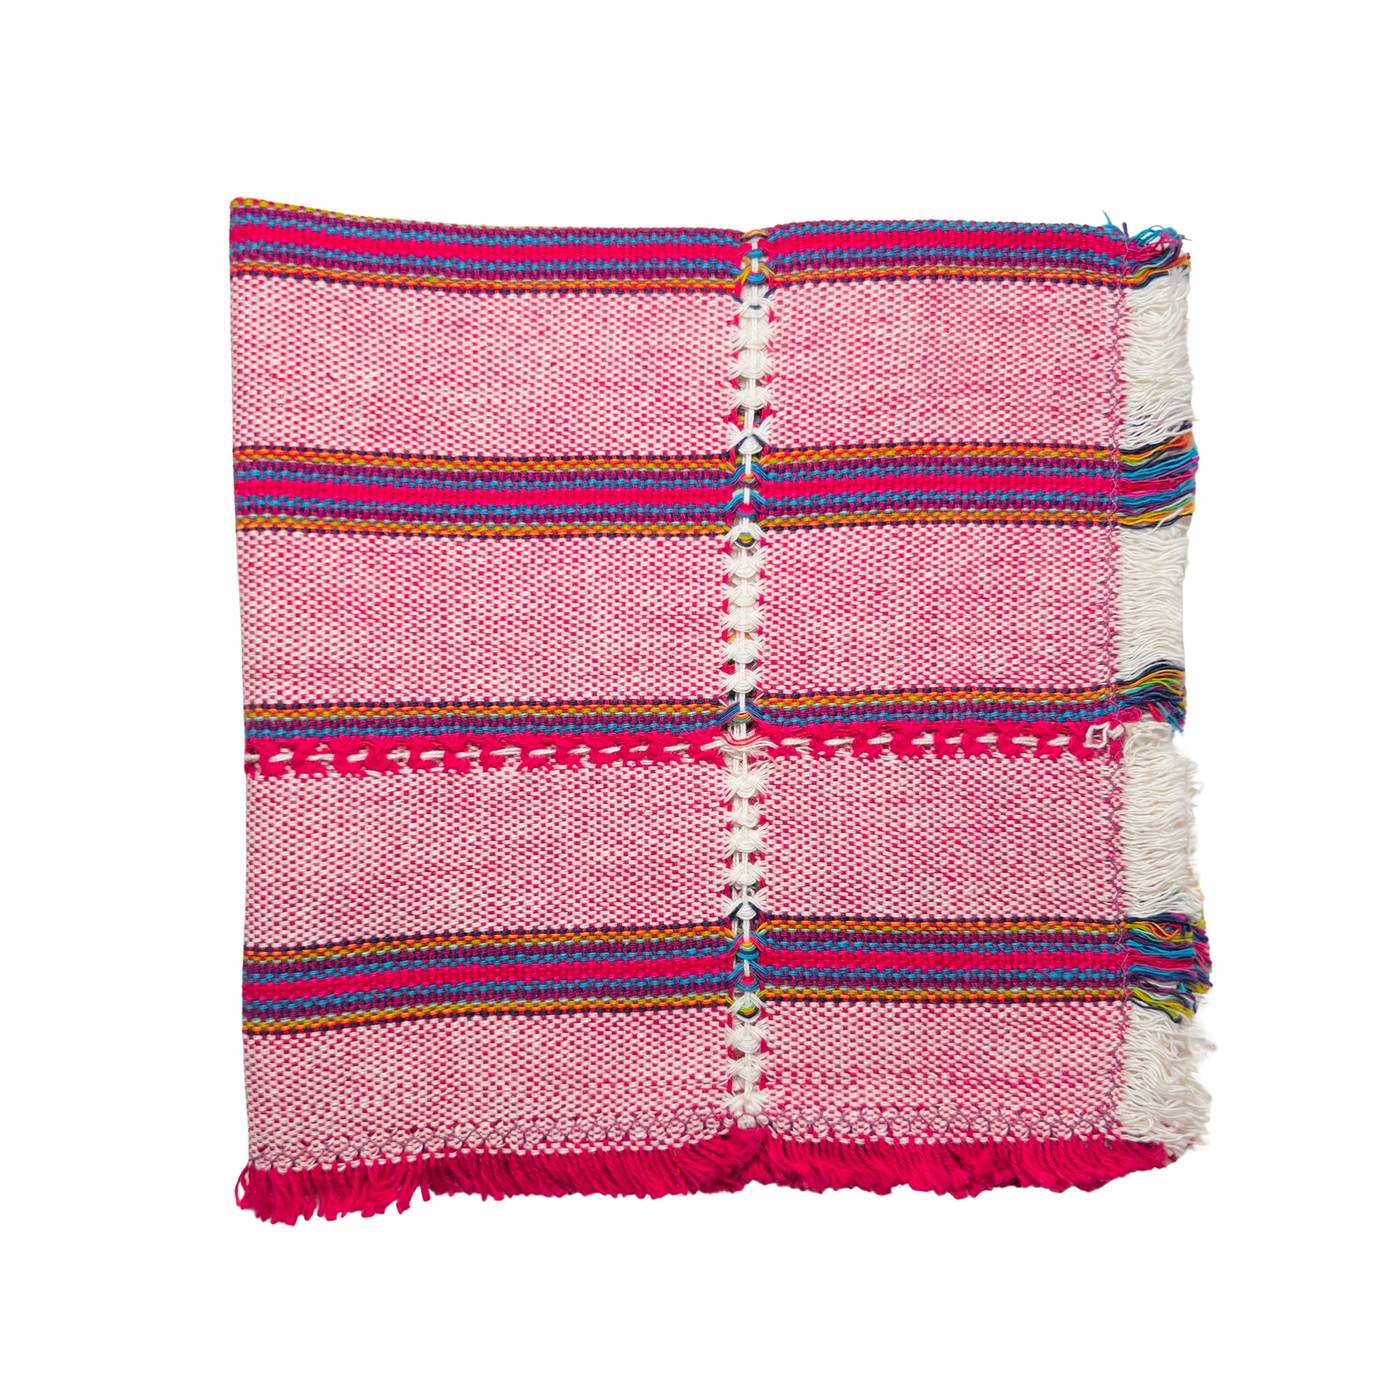 Dark fuschia striped handwoven napkin with small stripes of yellow, blue, green and natural.